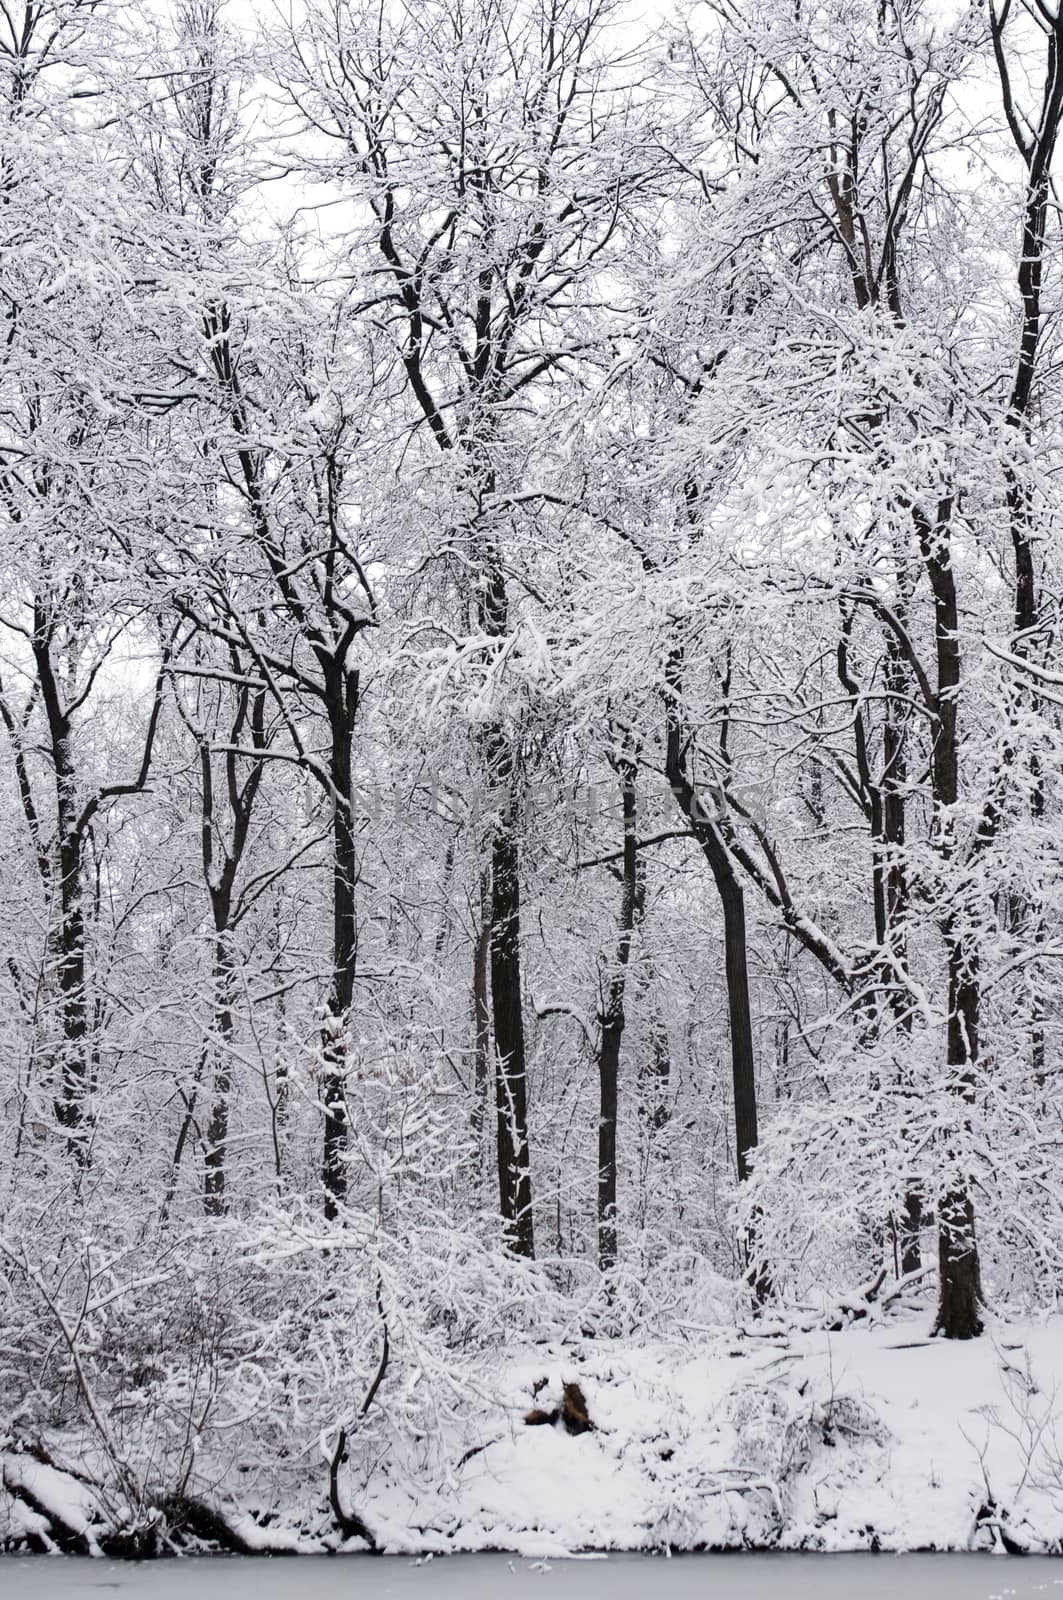 Winter landscape. Snow-covered trees in the park Kuzminki in Moscow.